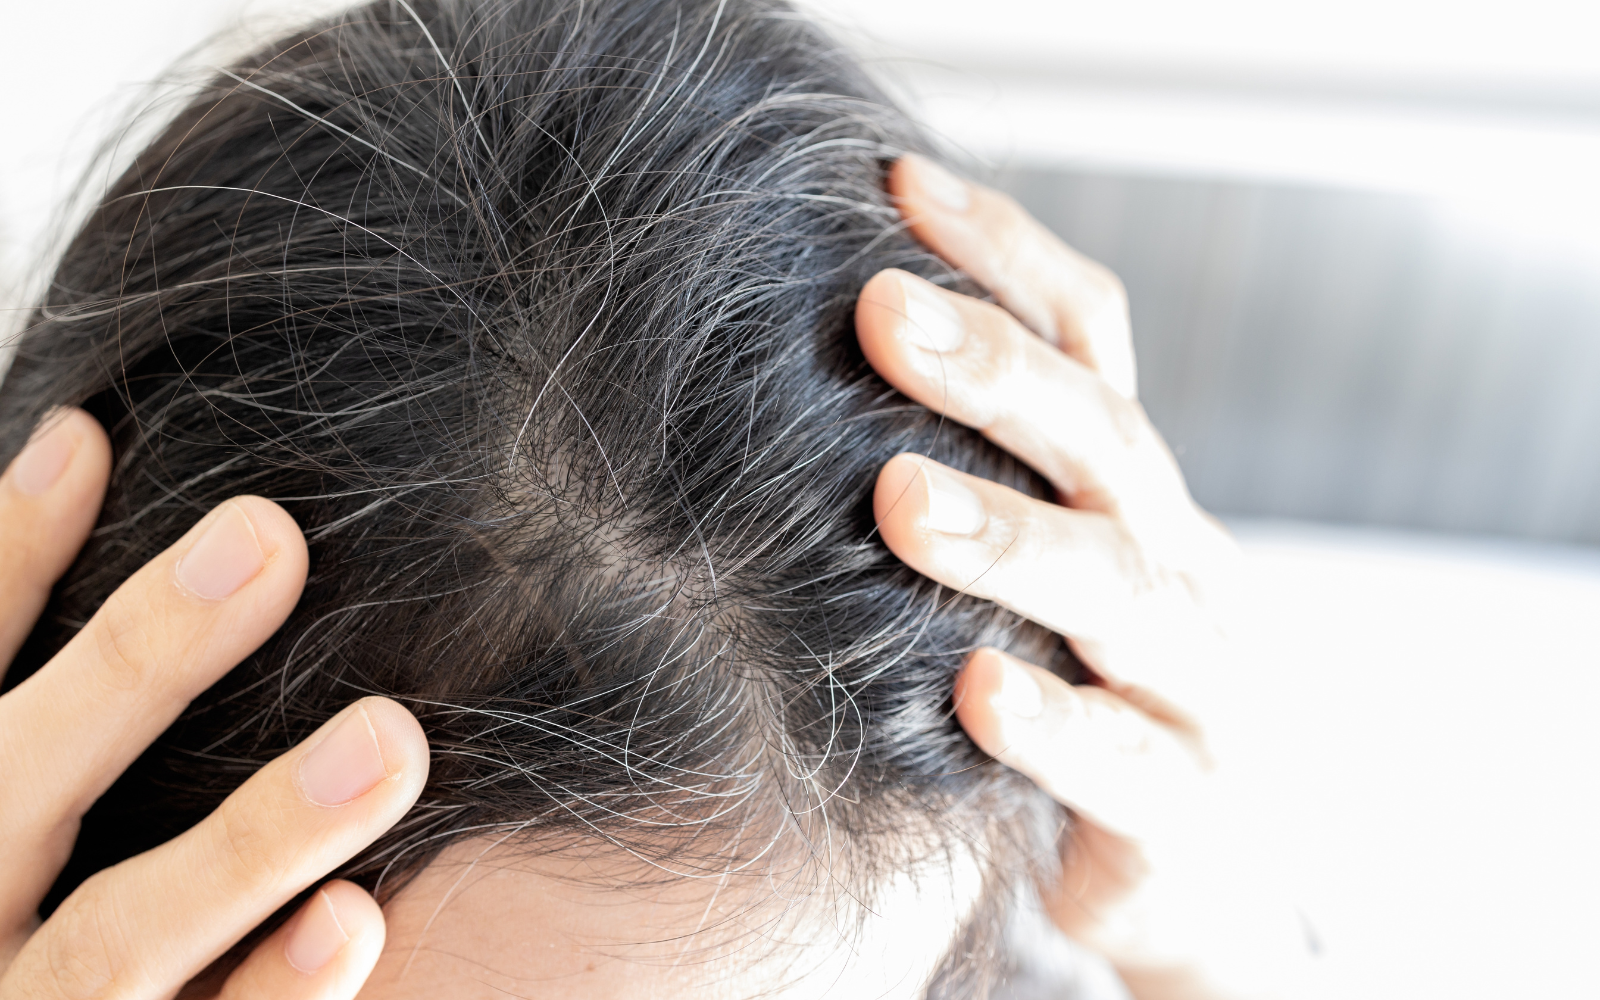 First signs of graying hair. Oxford Healthspan